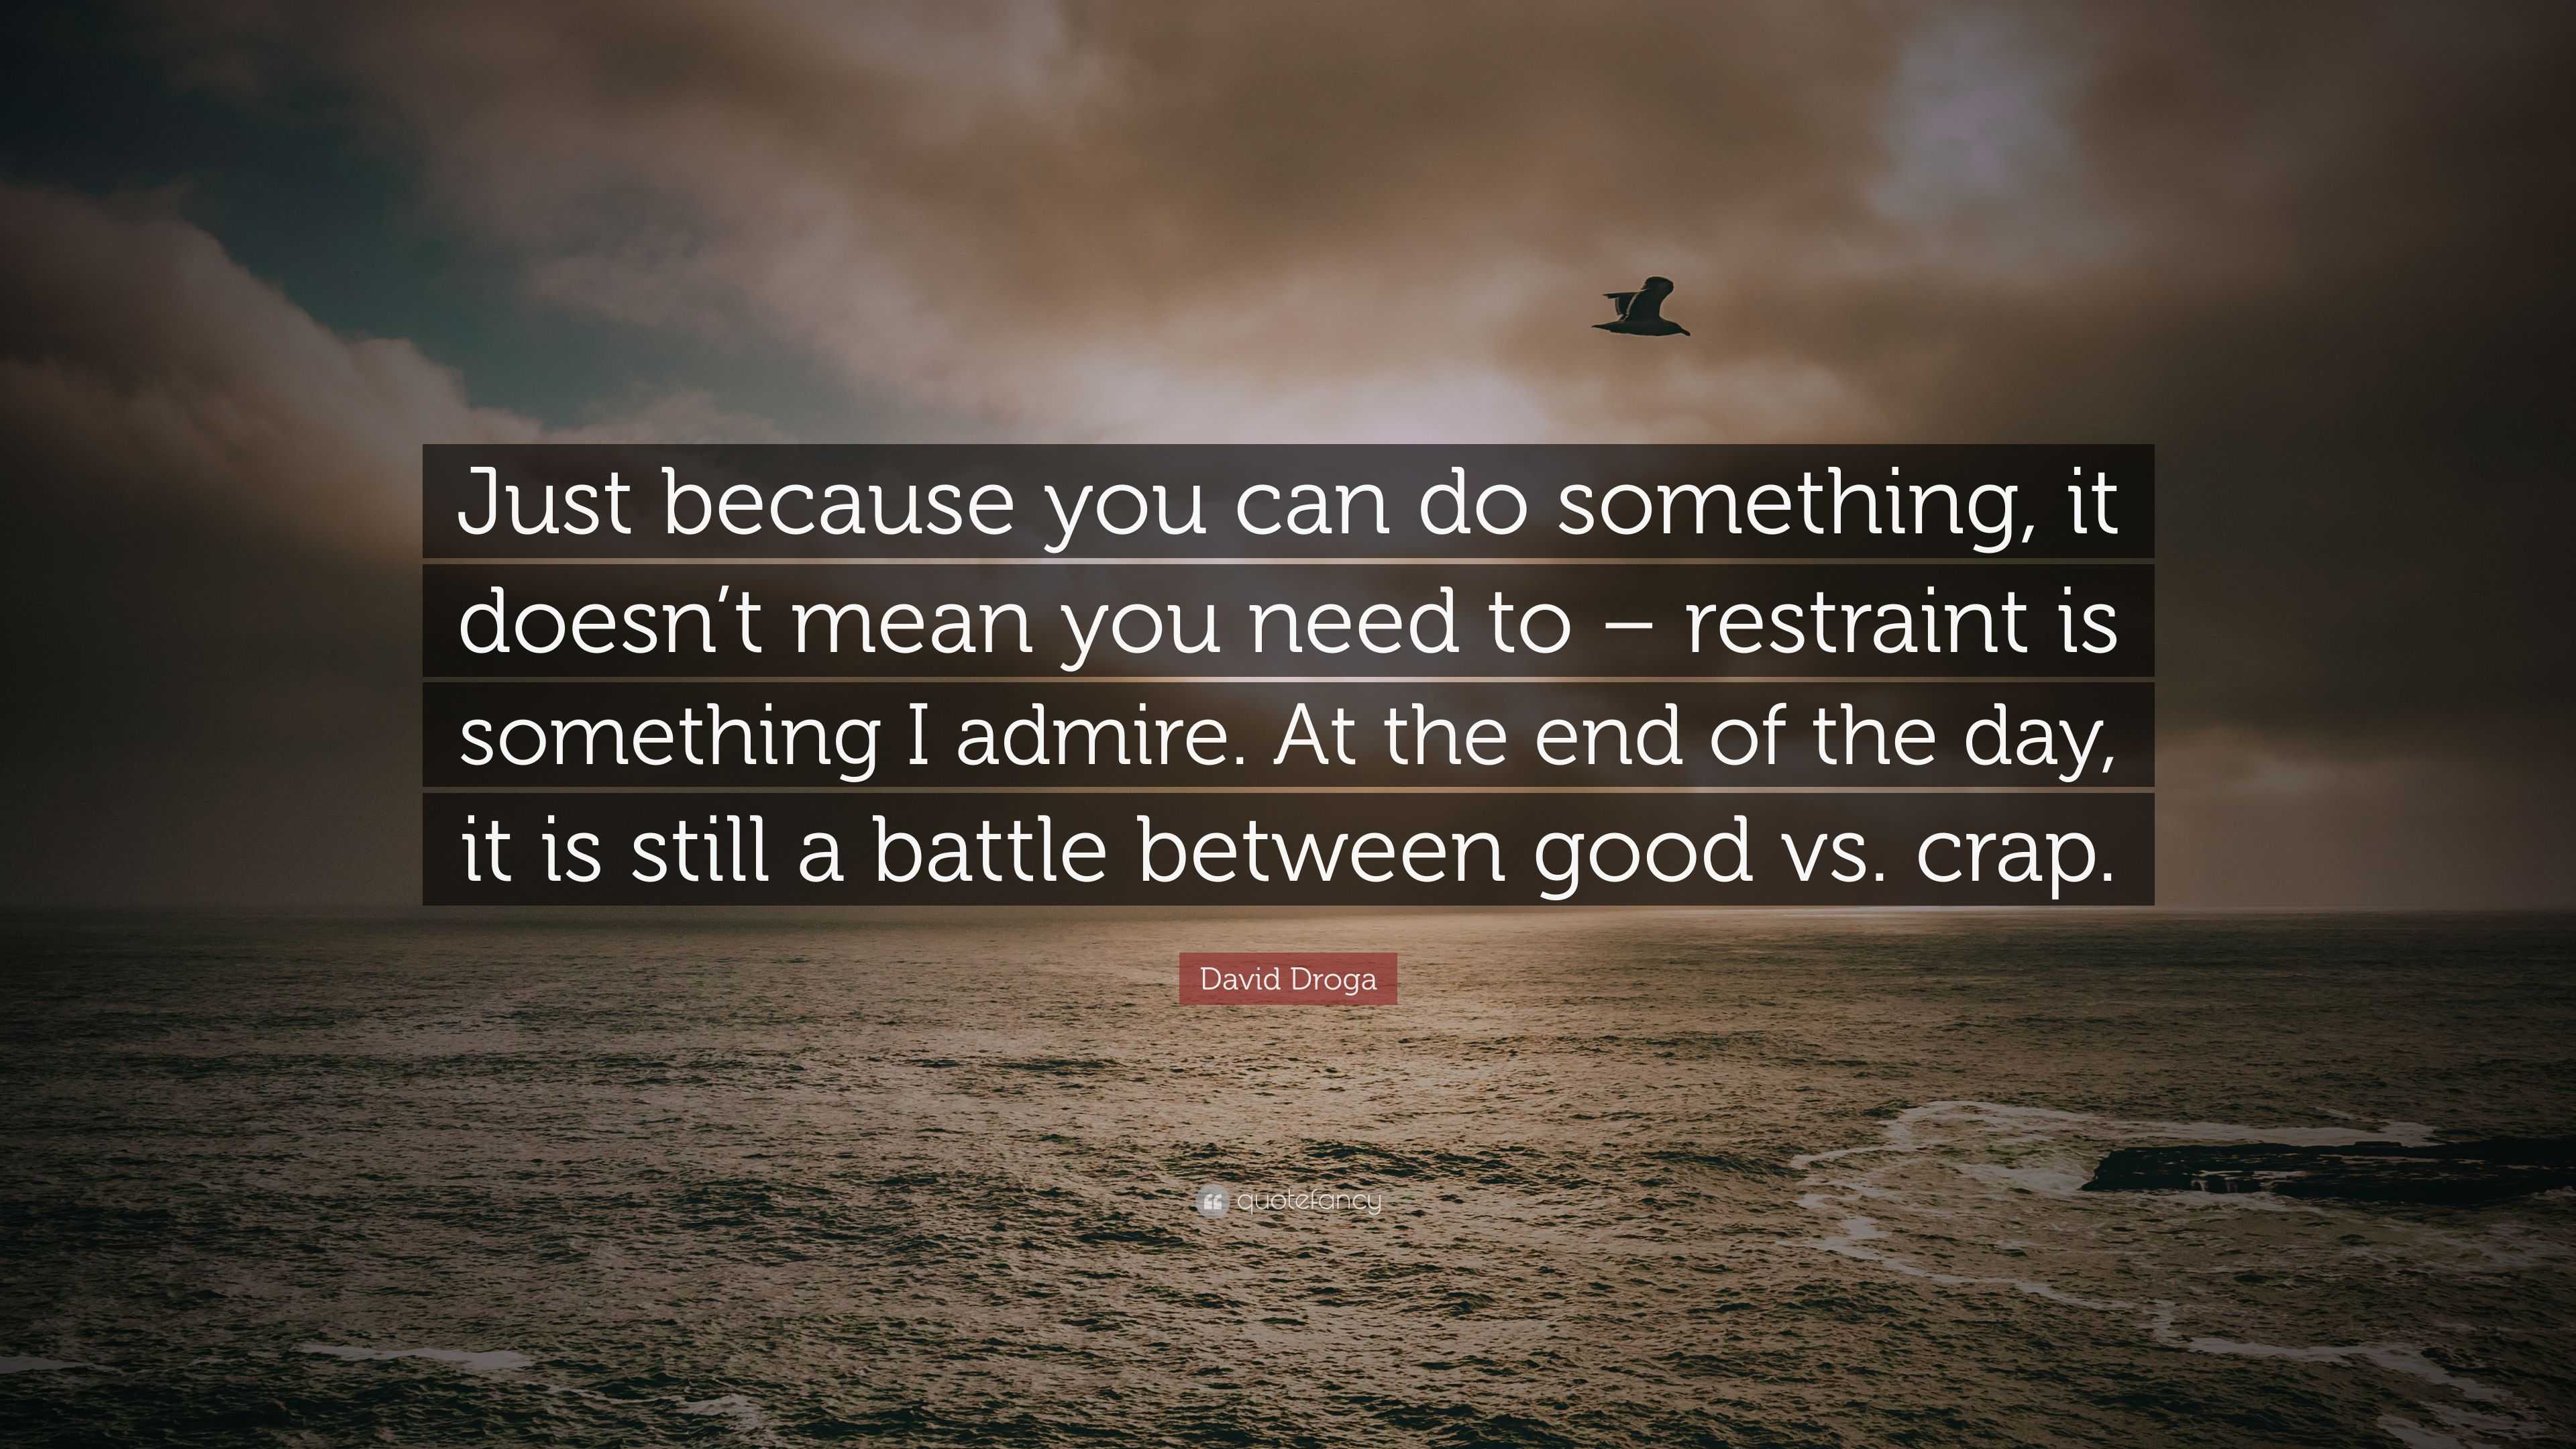 David Droga Quote: “Just because you can do something, it doesn’t mean ...